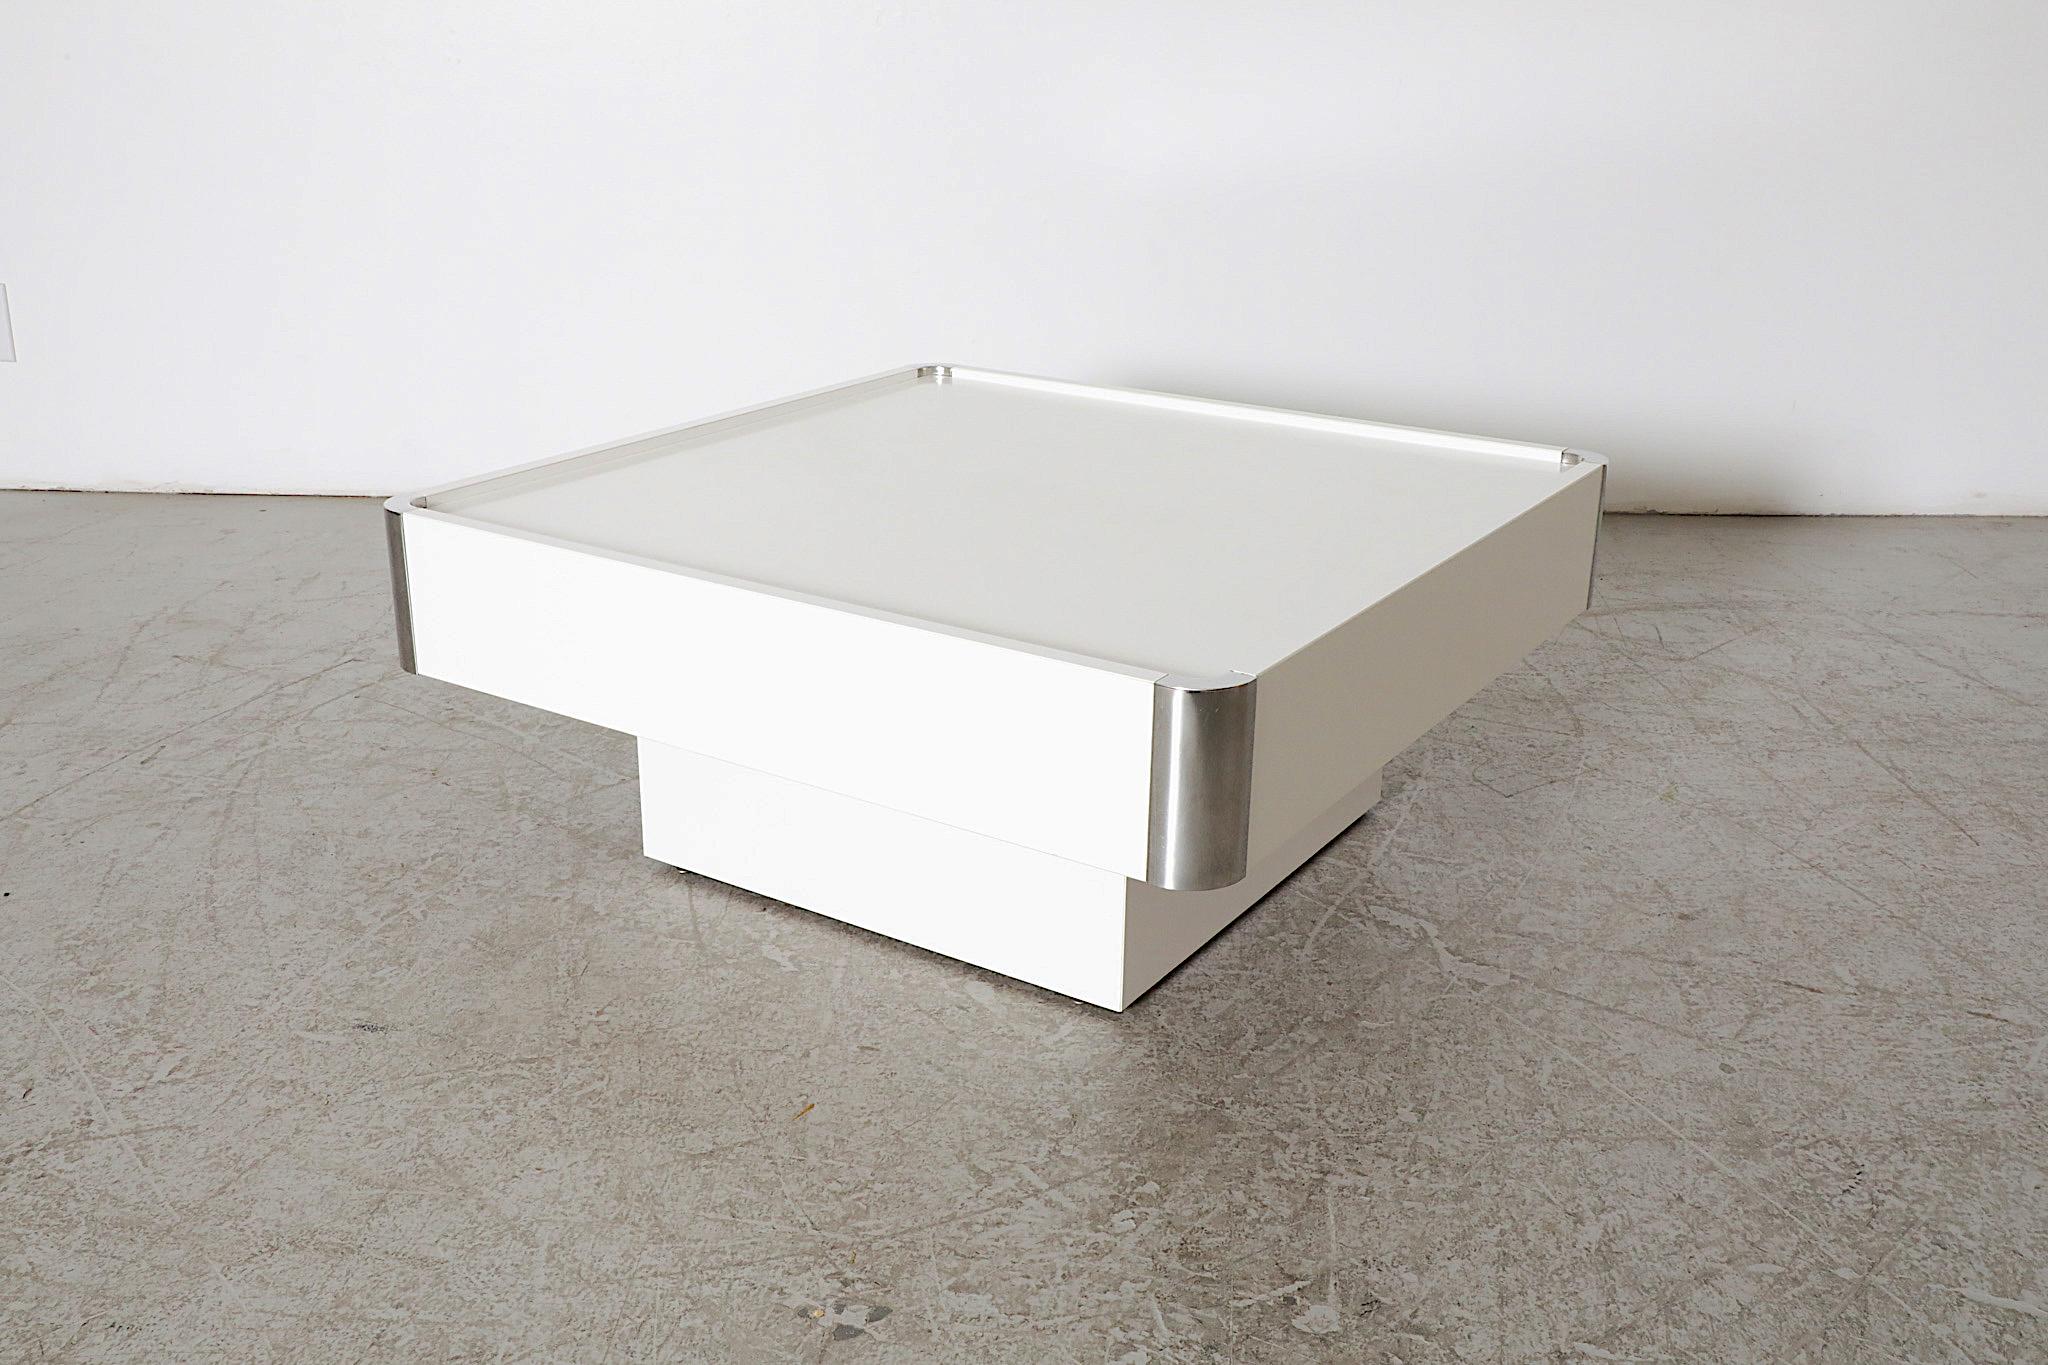 Modernist 1970's white coffee table with chrome corners design by famed Italian designer Willy Rizzo. Made for the Mario Sabot label. Pure and clean example of Italian minimalistic design. In original condition with visible wear including light